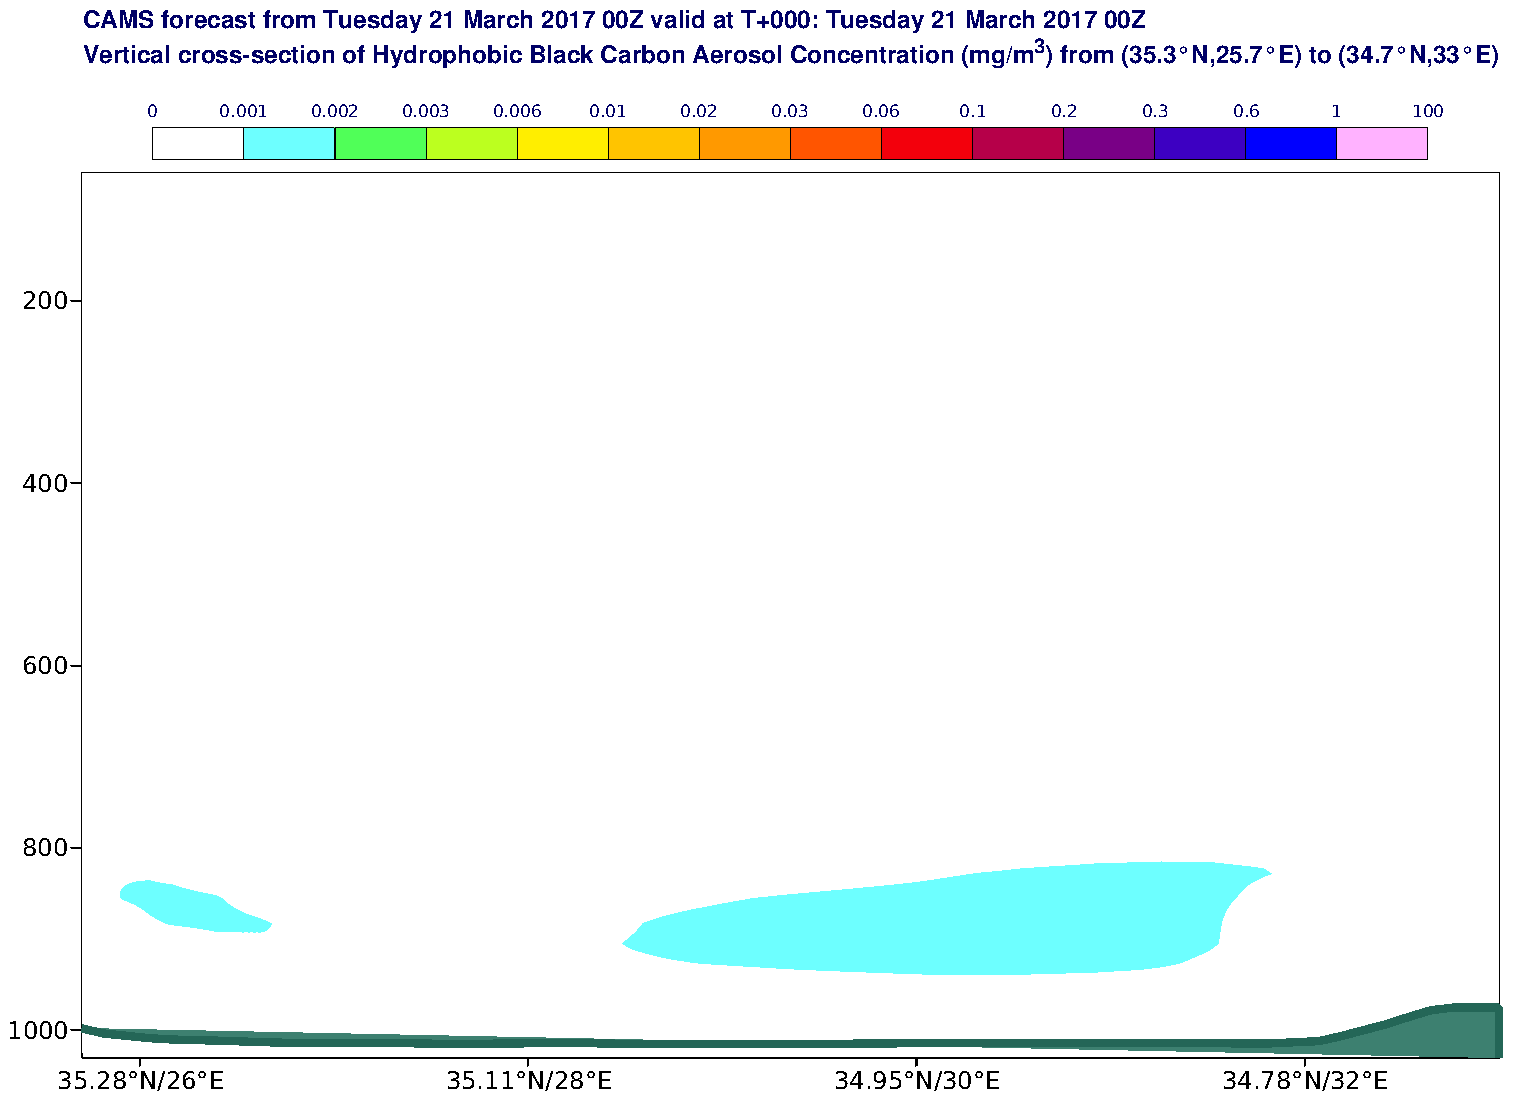 Vertical cross-section of Hydrophobic Black Carbon Aerosol Concentration (mg/m3) valid at T0 - 2017-03-21 00:00